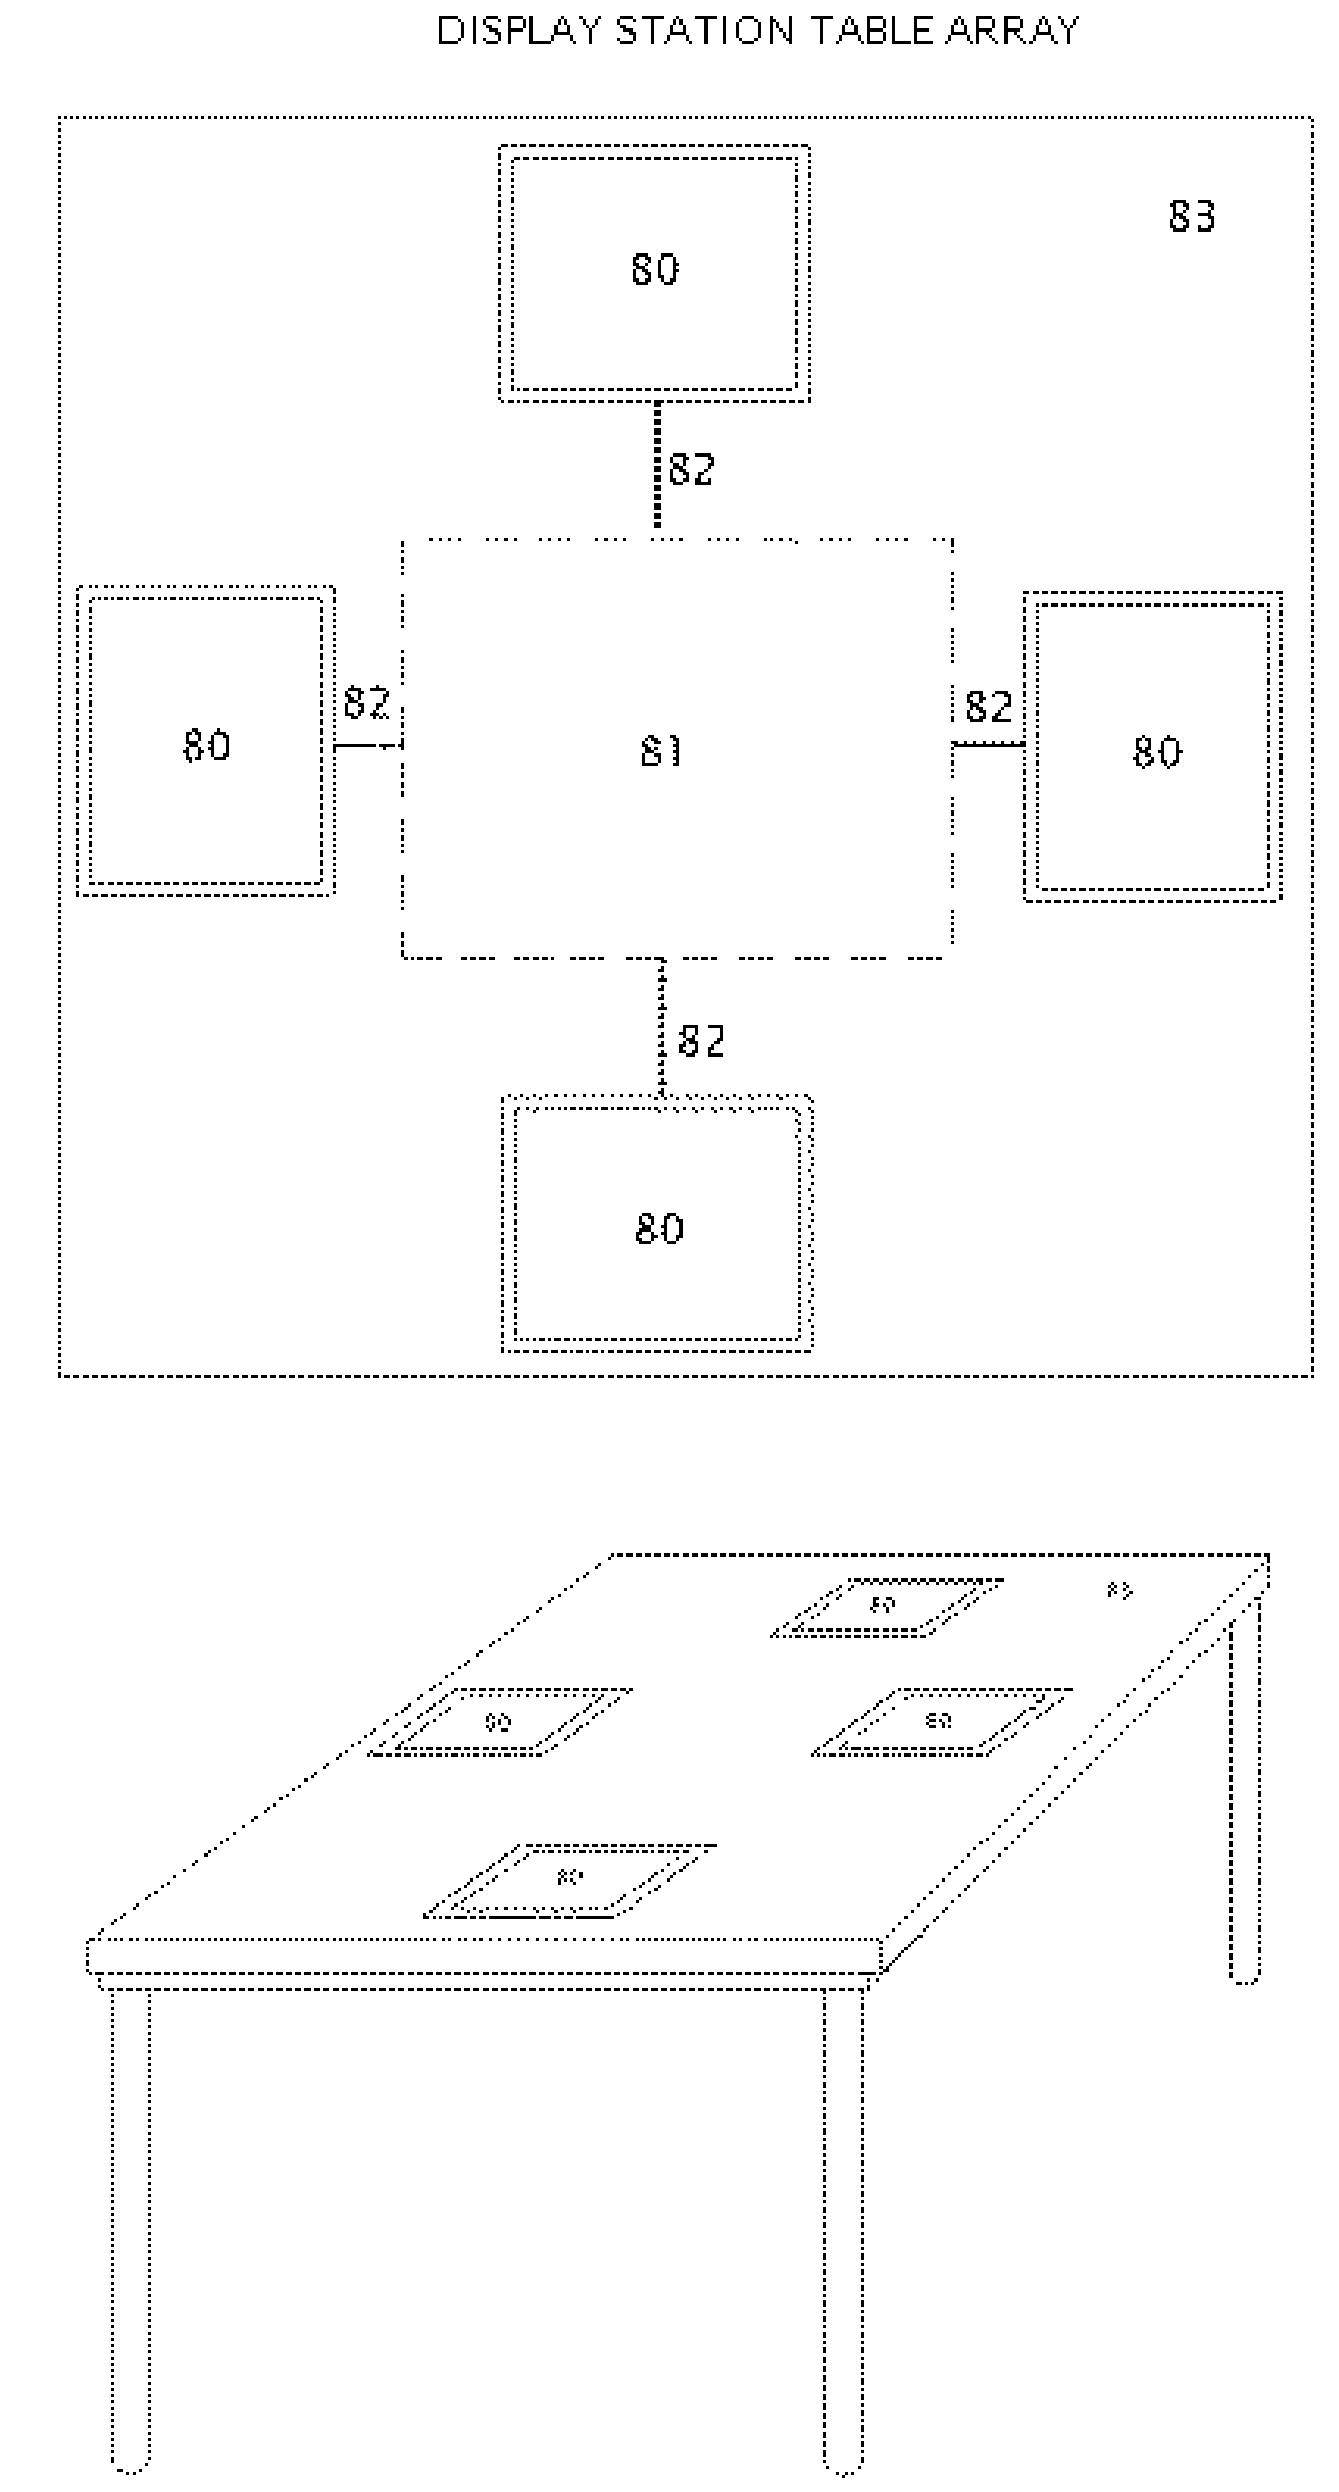 Controlled and Monitored Remote Advertising and Information Display System